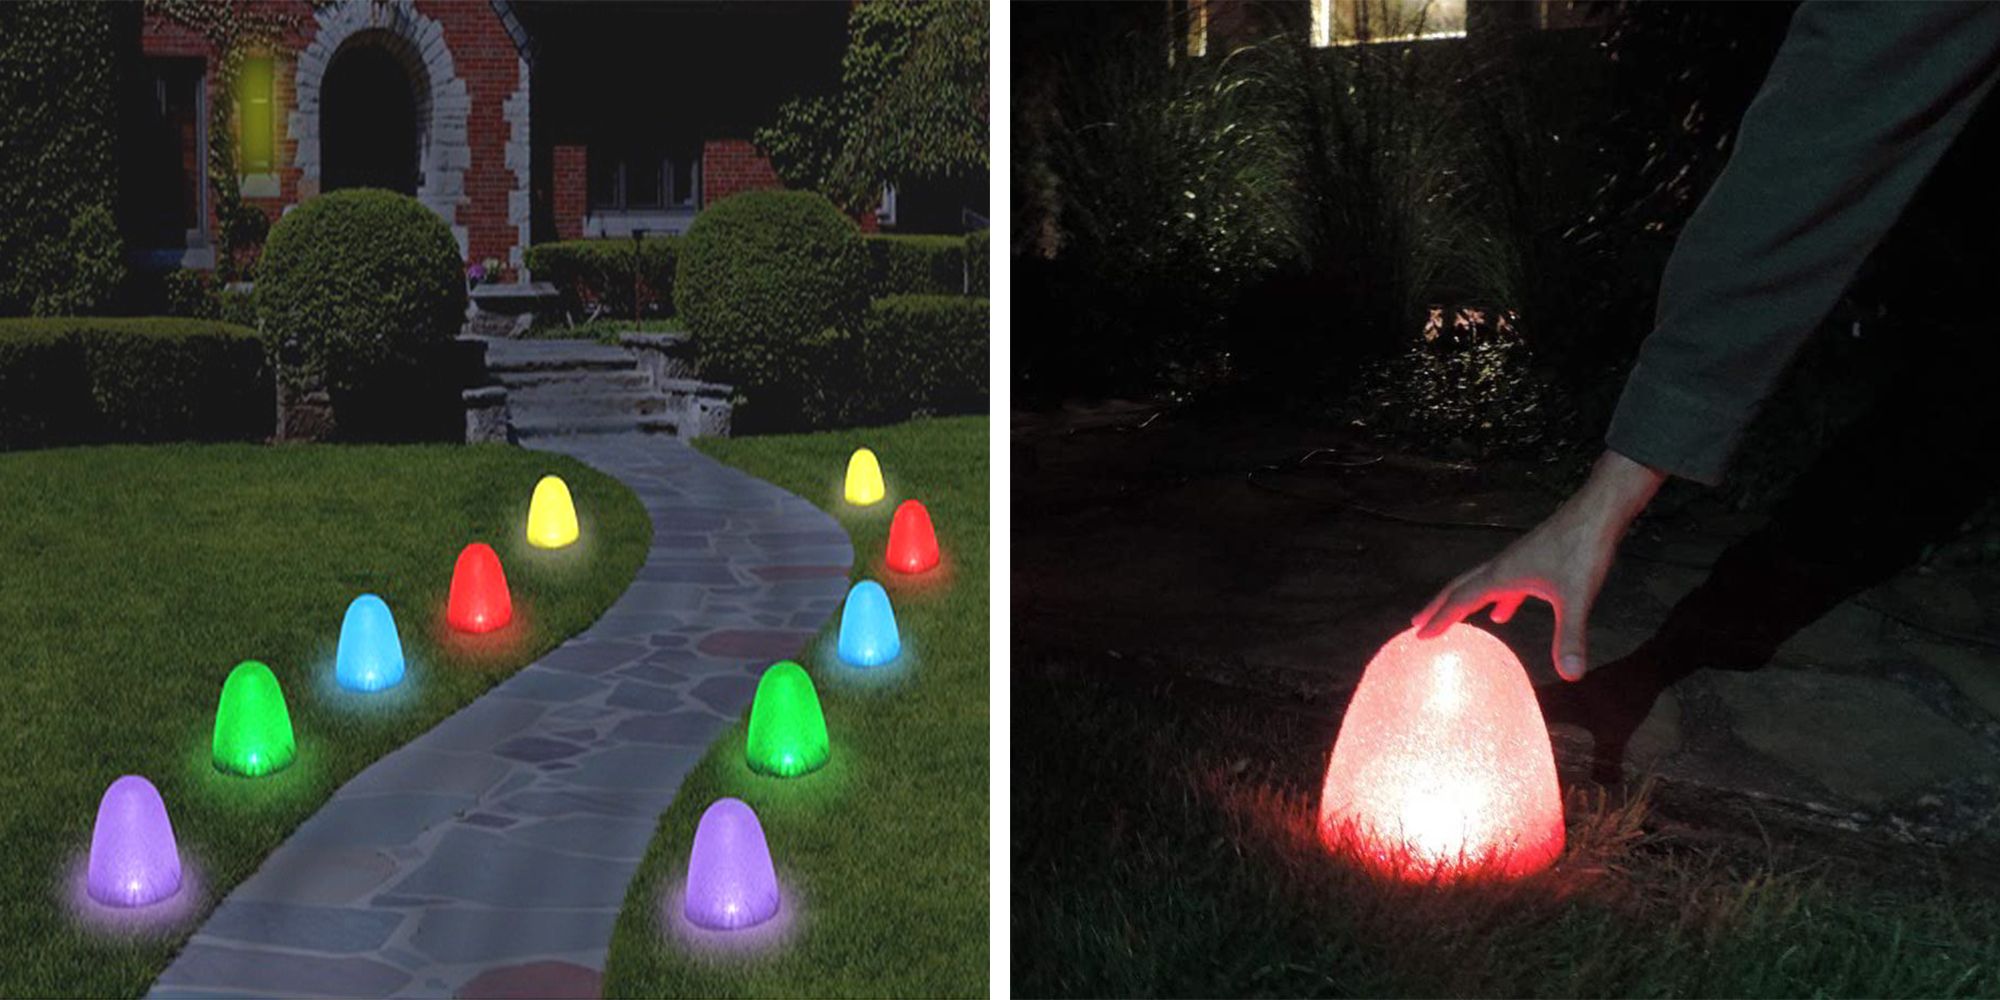 10 SOLAR STAKE LIGHTS Easter Outdoor Decorations Pathway Lighting,  Christmas